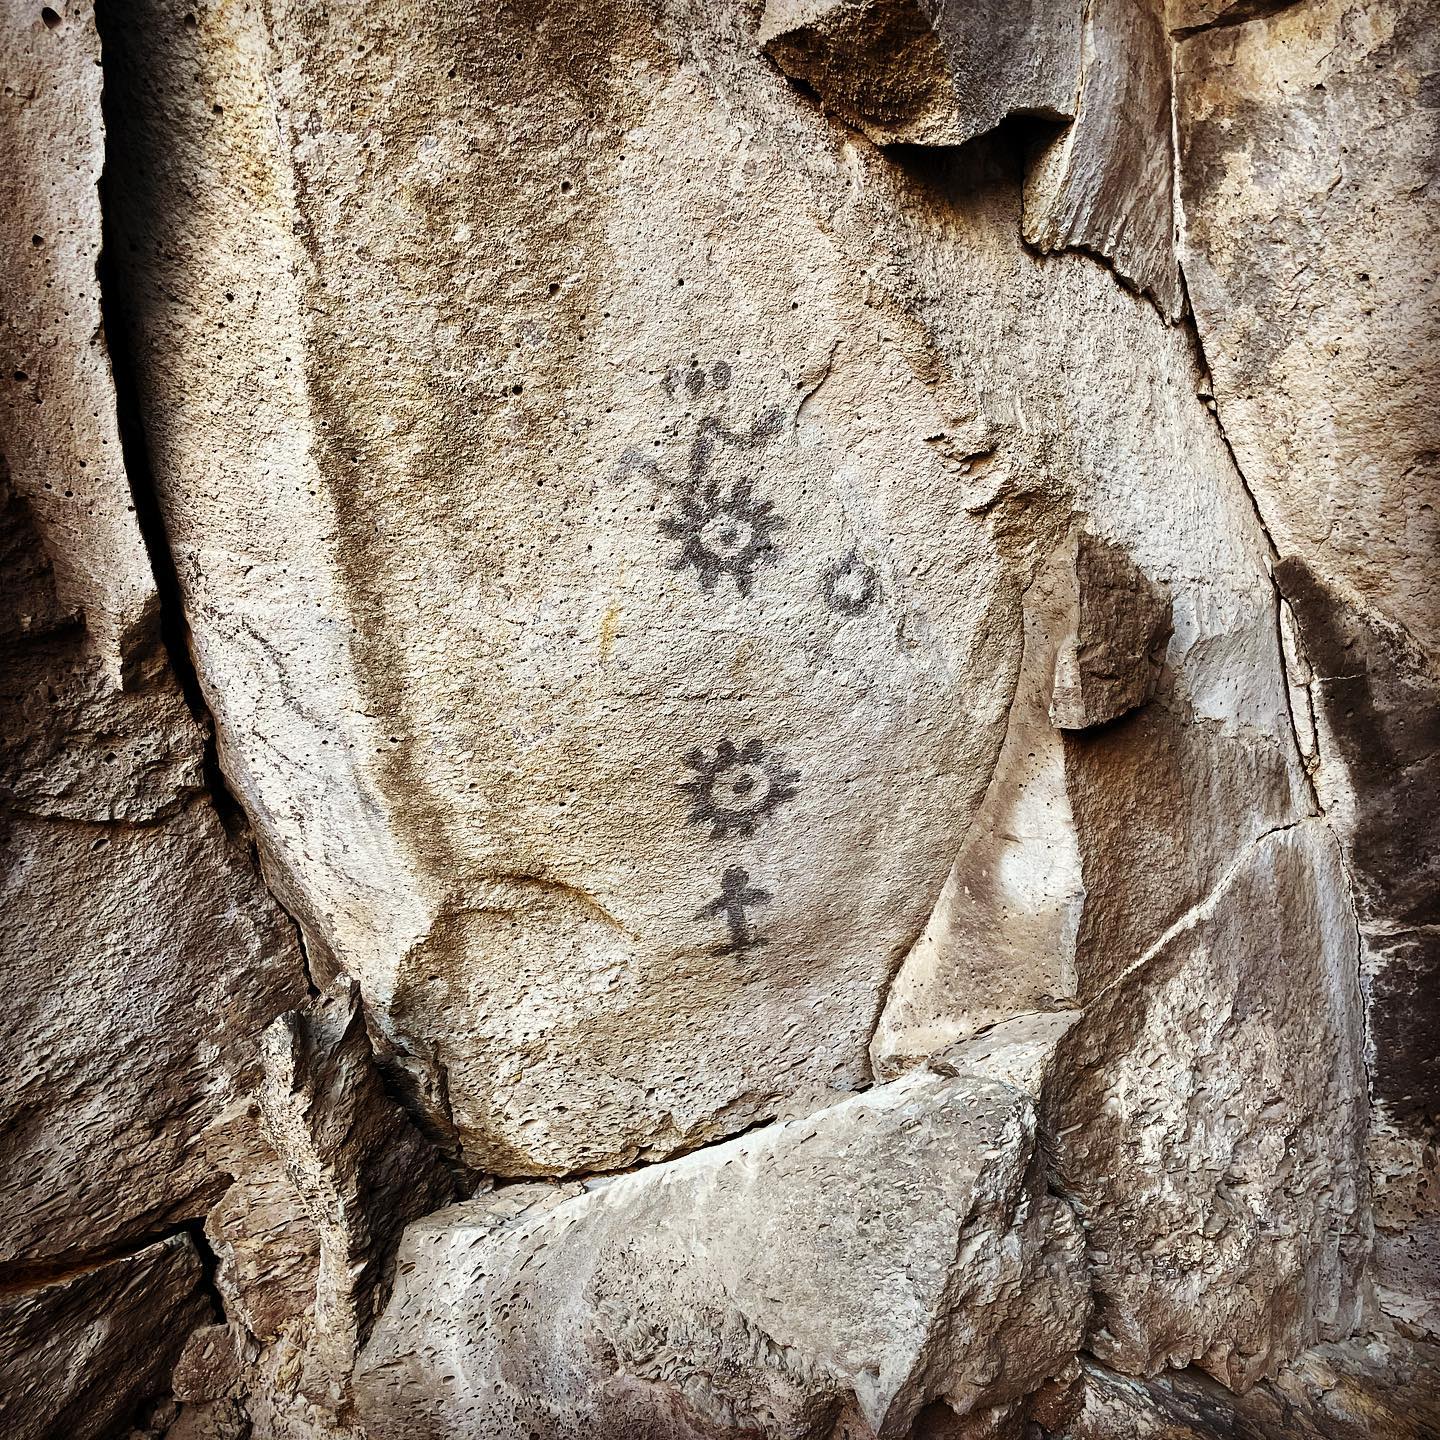 Ancient cave paintings remind us of the old world wisdom embodied by Shimshai’s new mystic folk music.